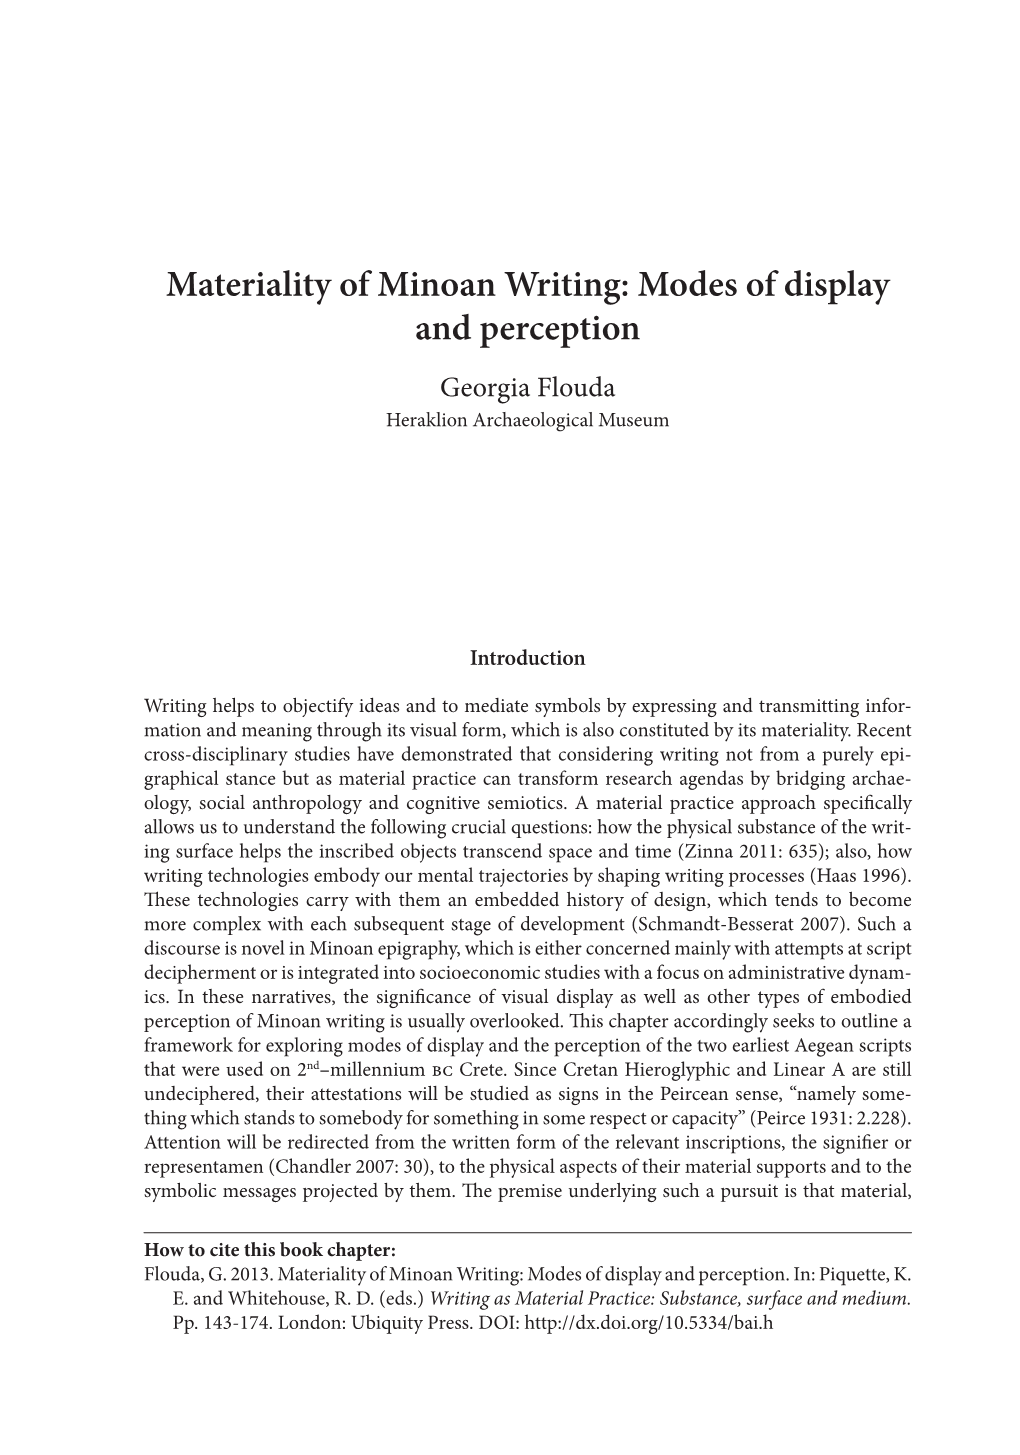 Materiality of Minoan Writing: Modes of Display and Perception Georgia Flouda Heraklion Archaeological Museum